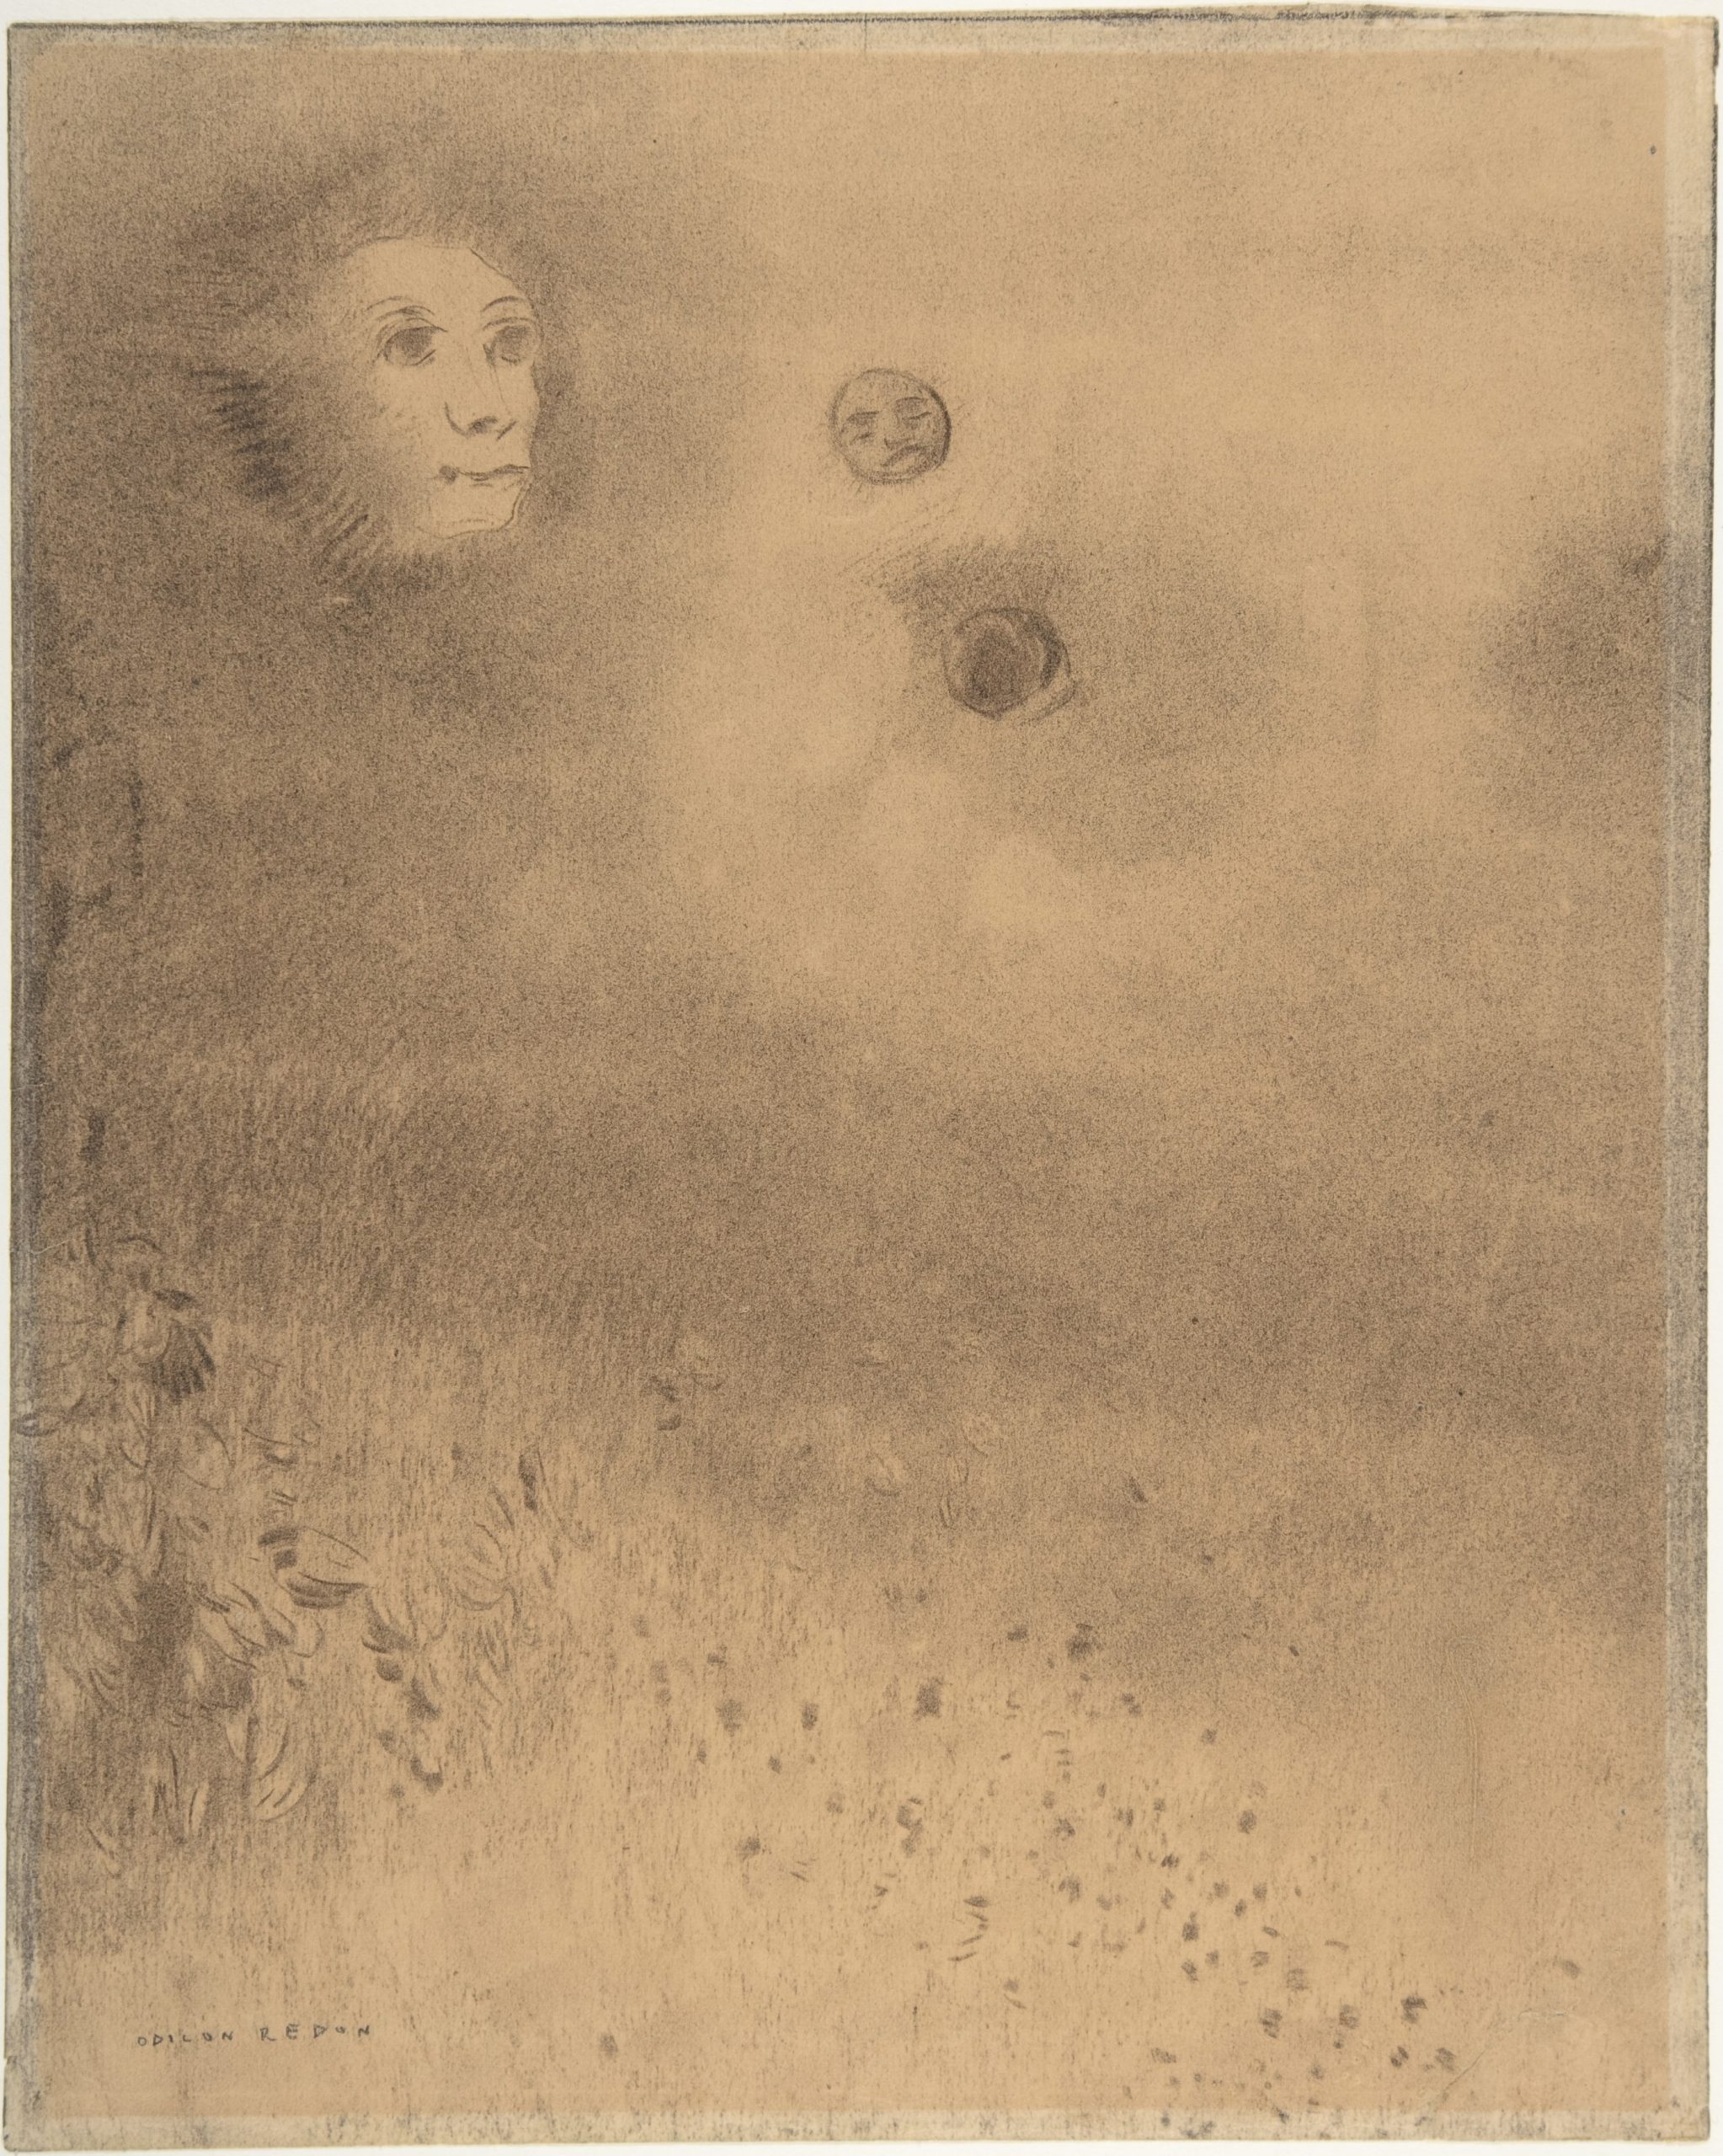 Image showing Hallucinations art piece by Odilon Redon